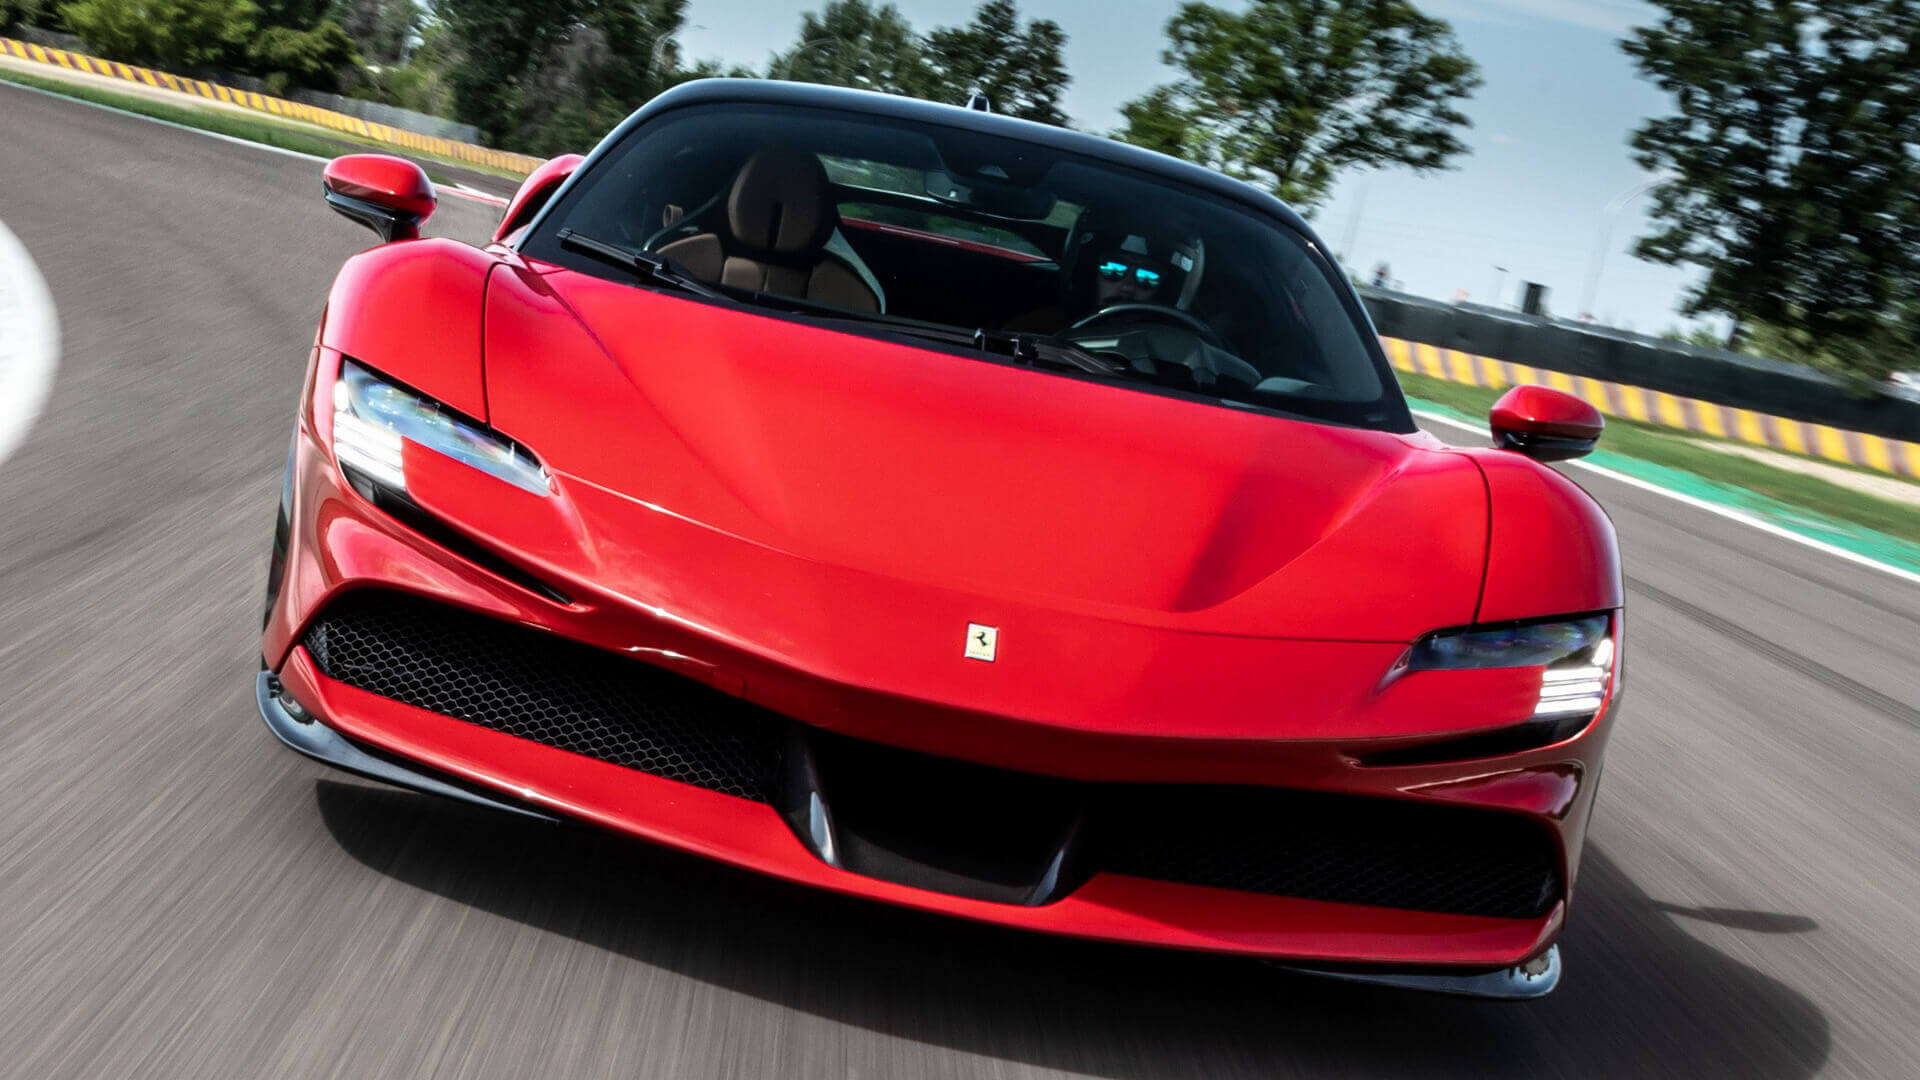 Ferrari SF90 Stradale - specifications, photos, video, review